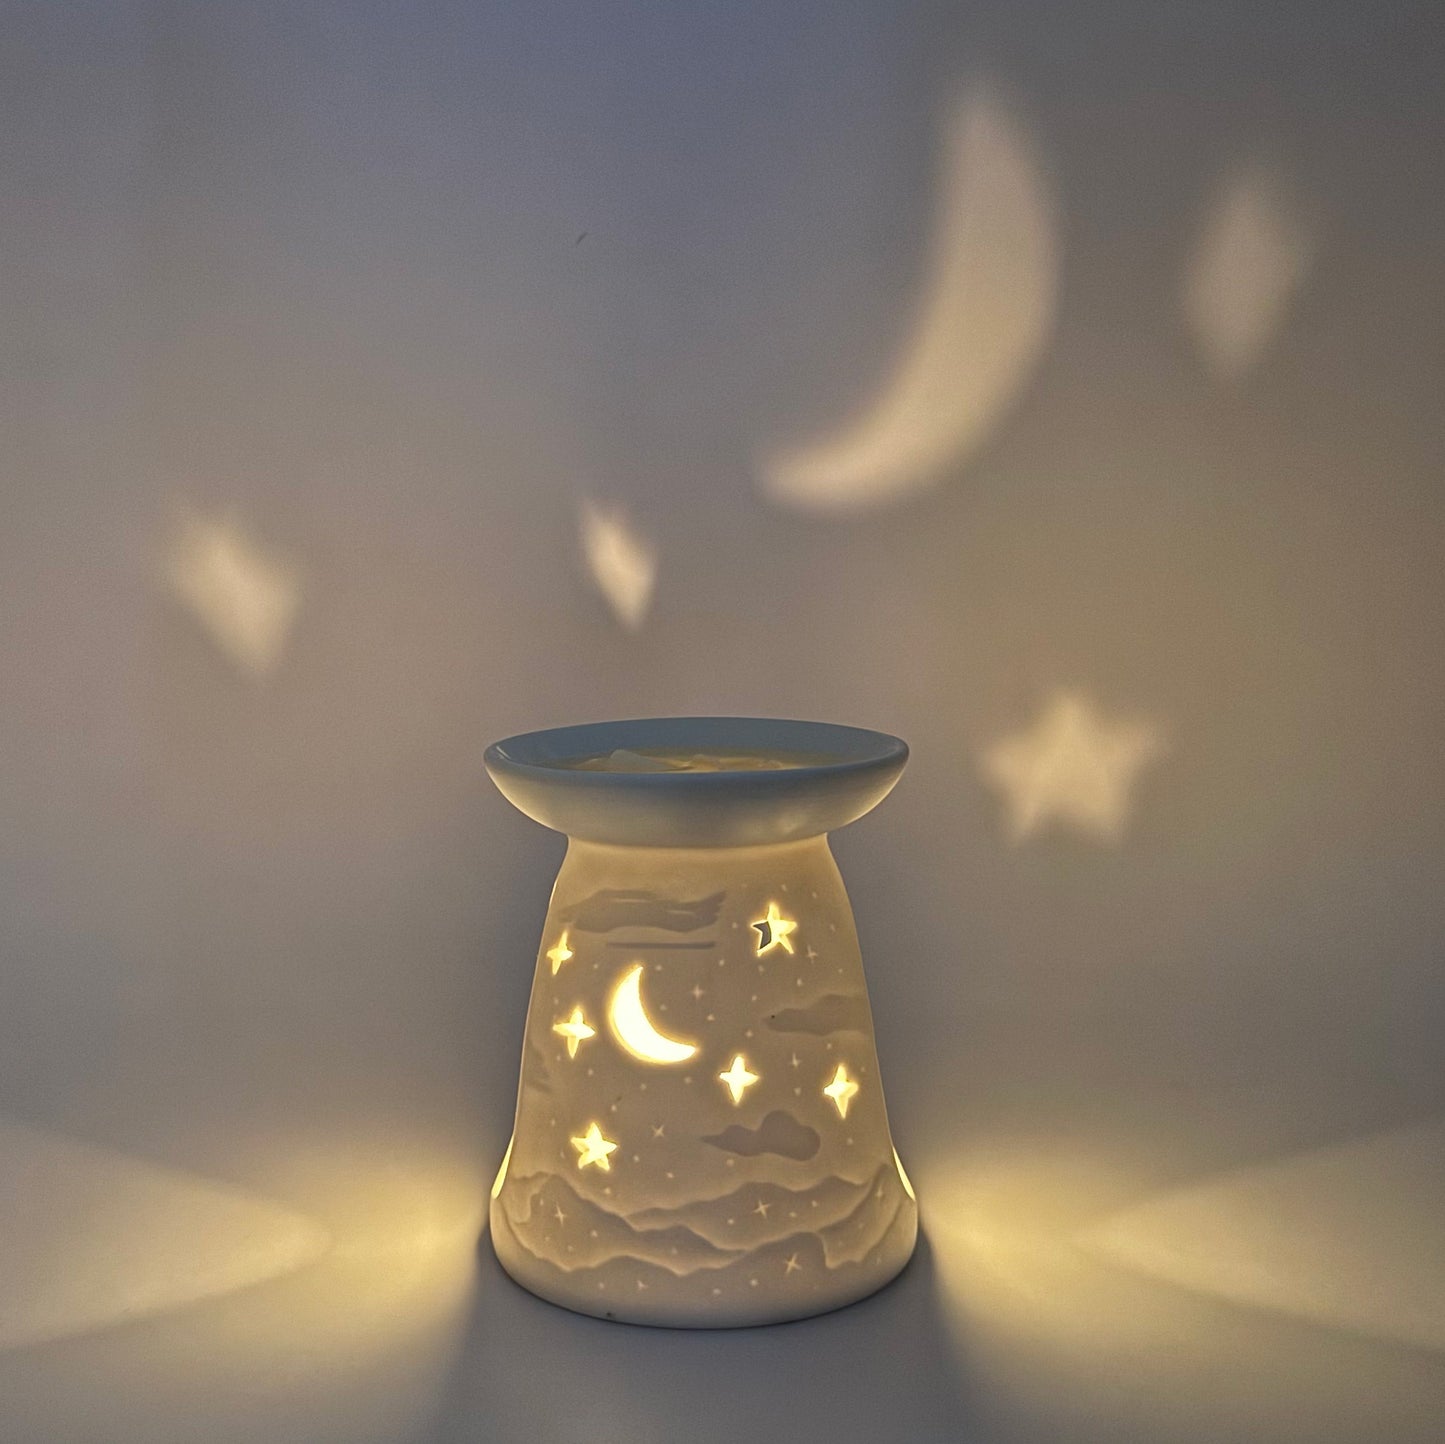 White Porcelain Tealight Burner from The Violet Wick, Moon and Stars design